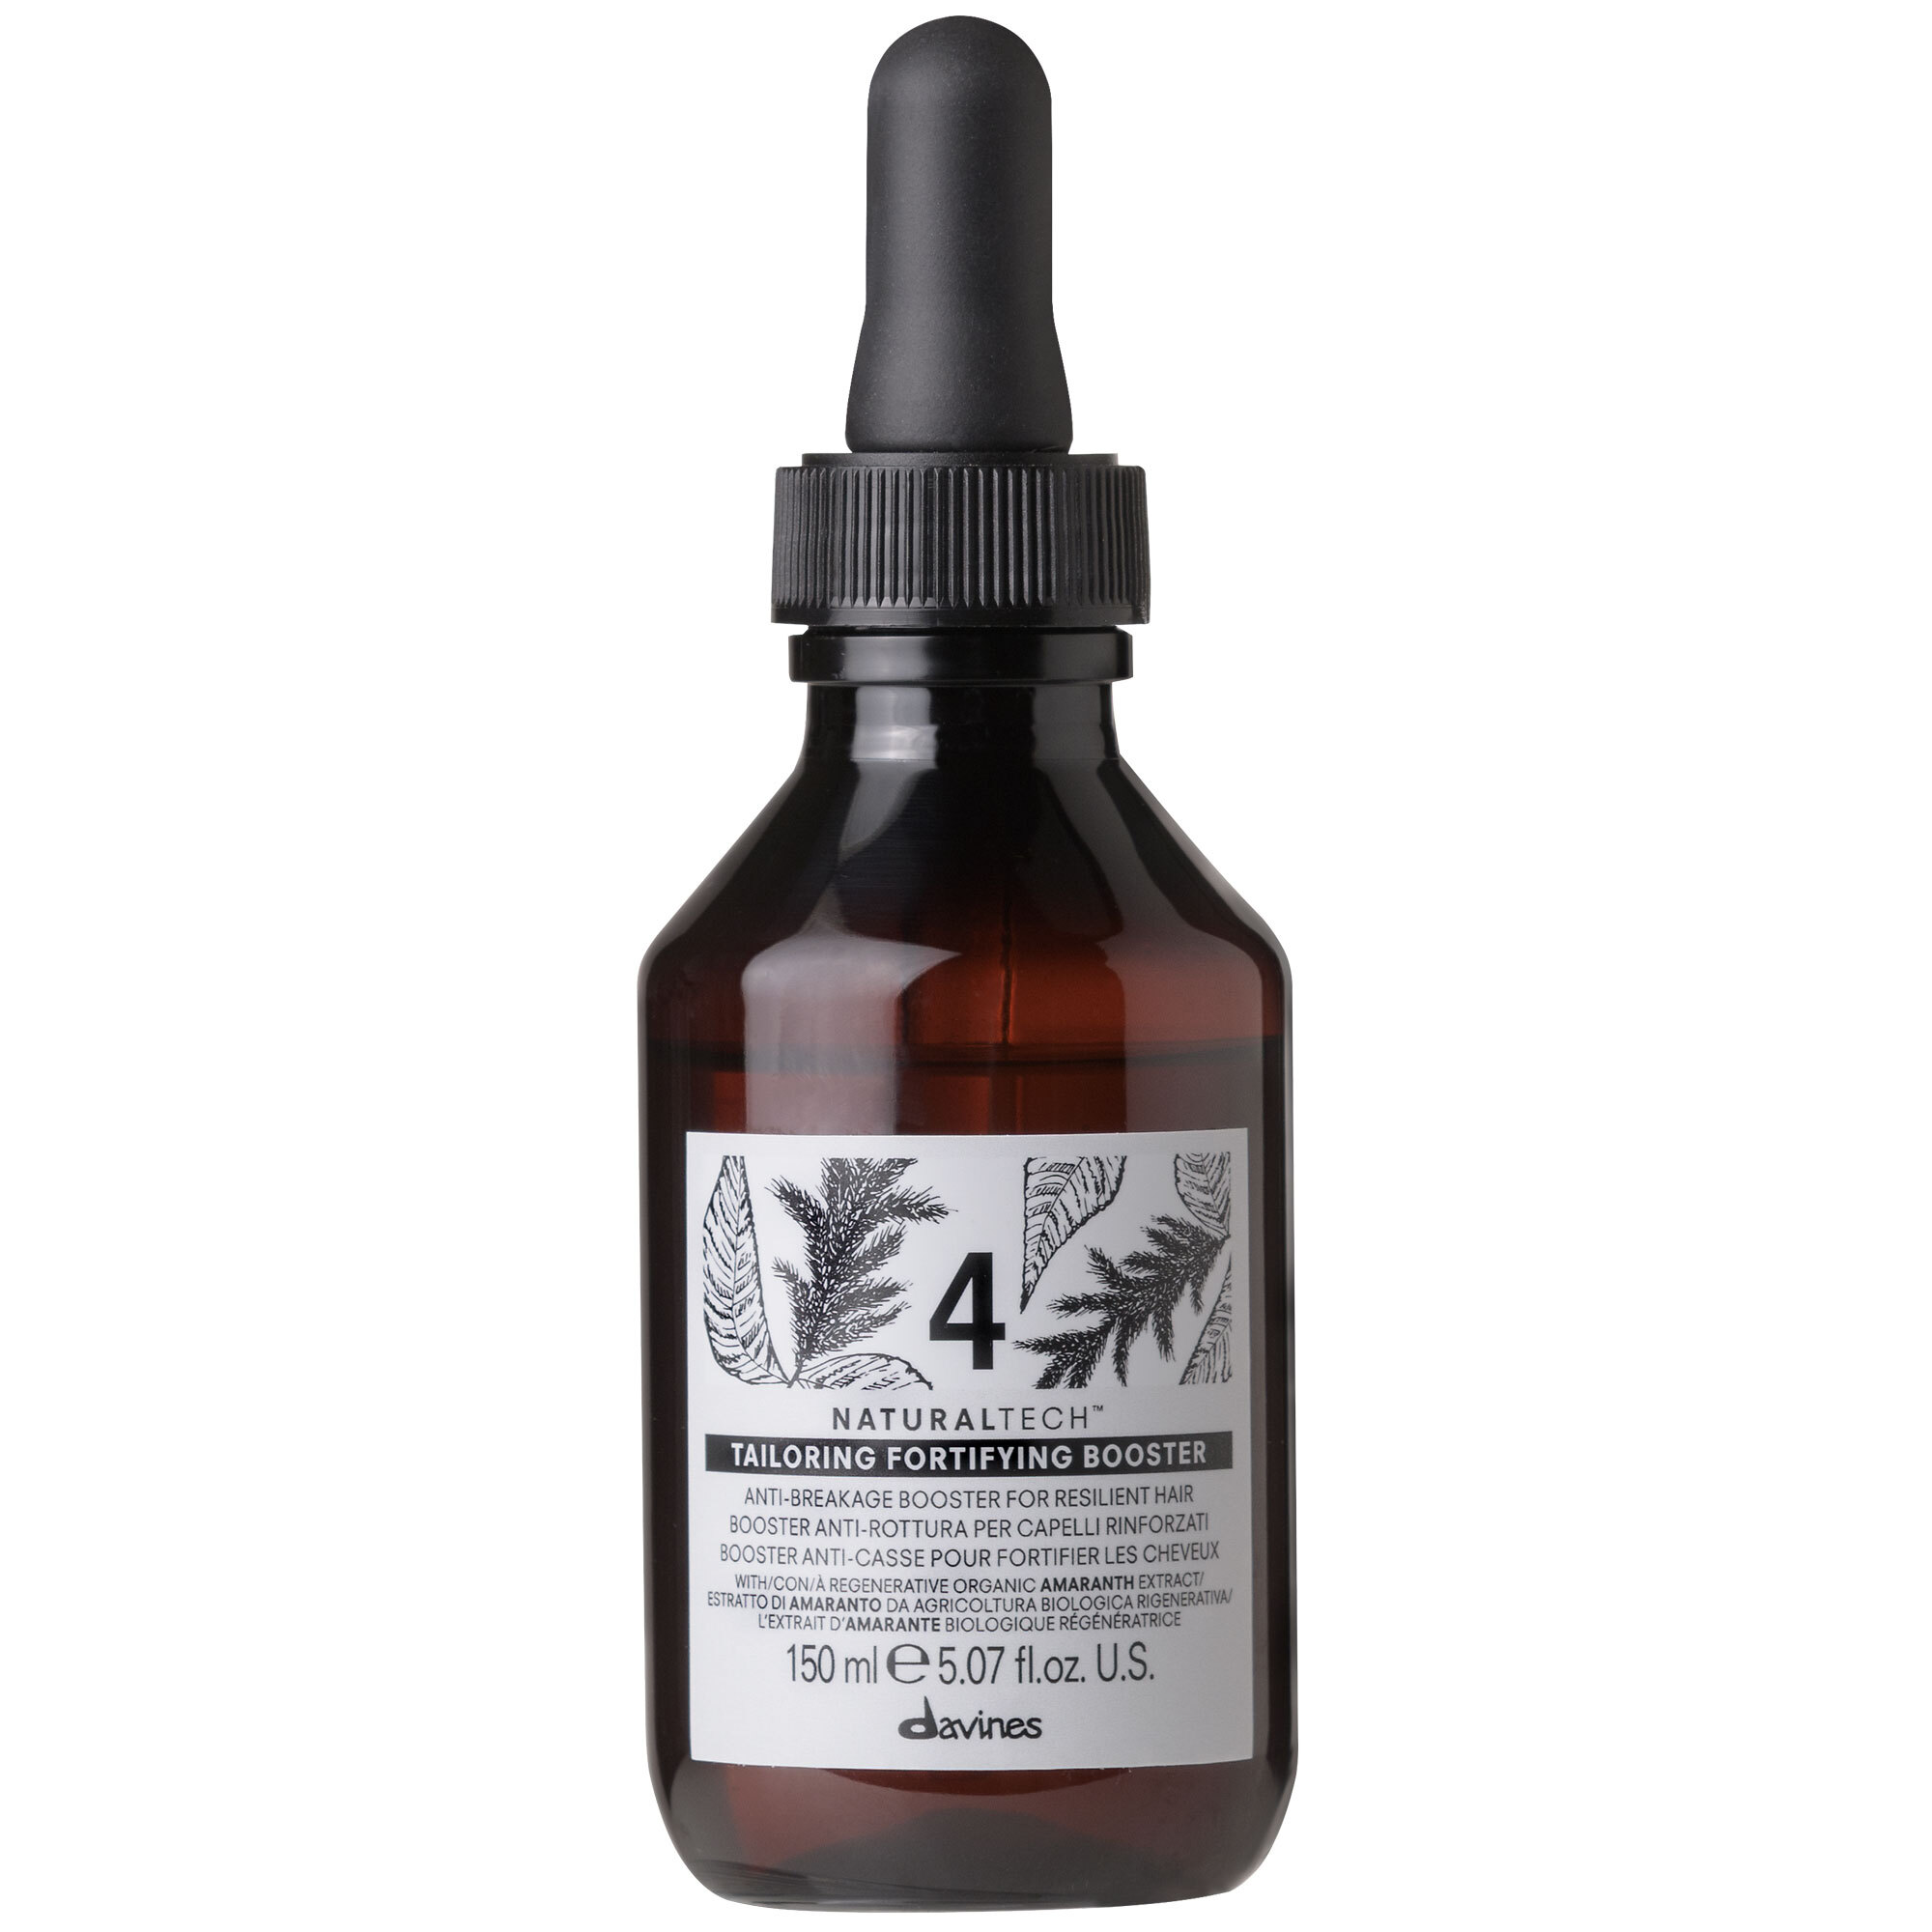 Davines NaturalTech Tailoring: 4 Booster Fortifying